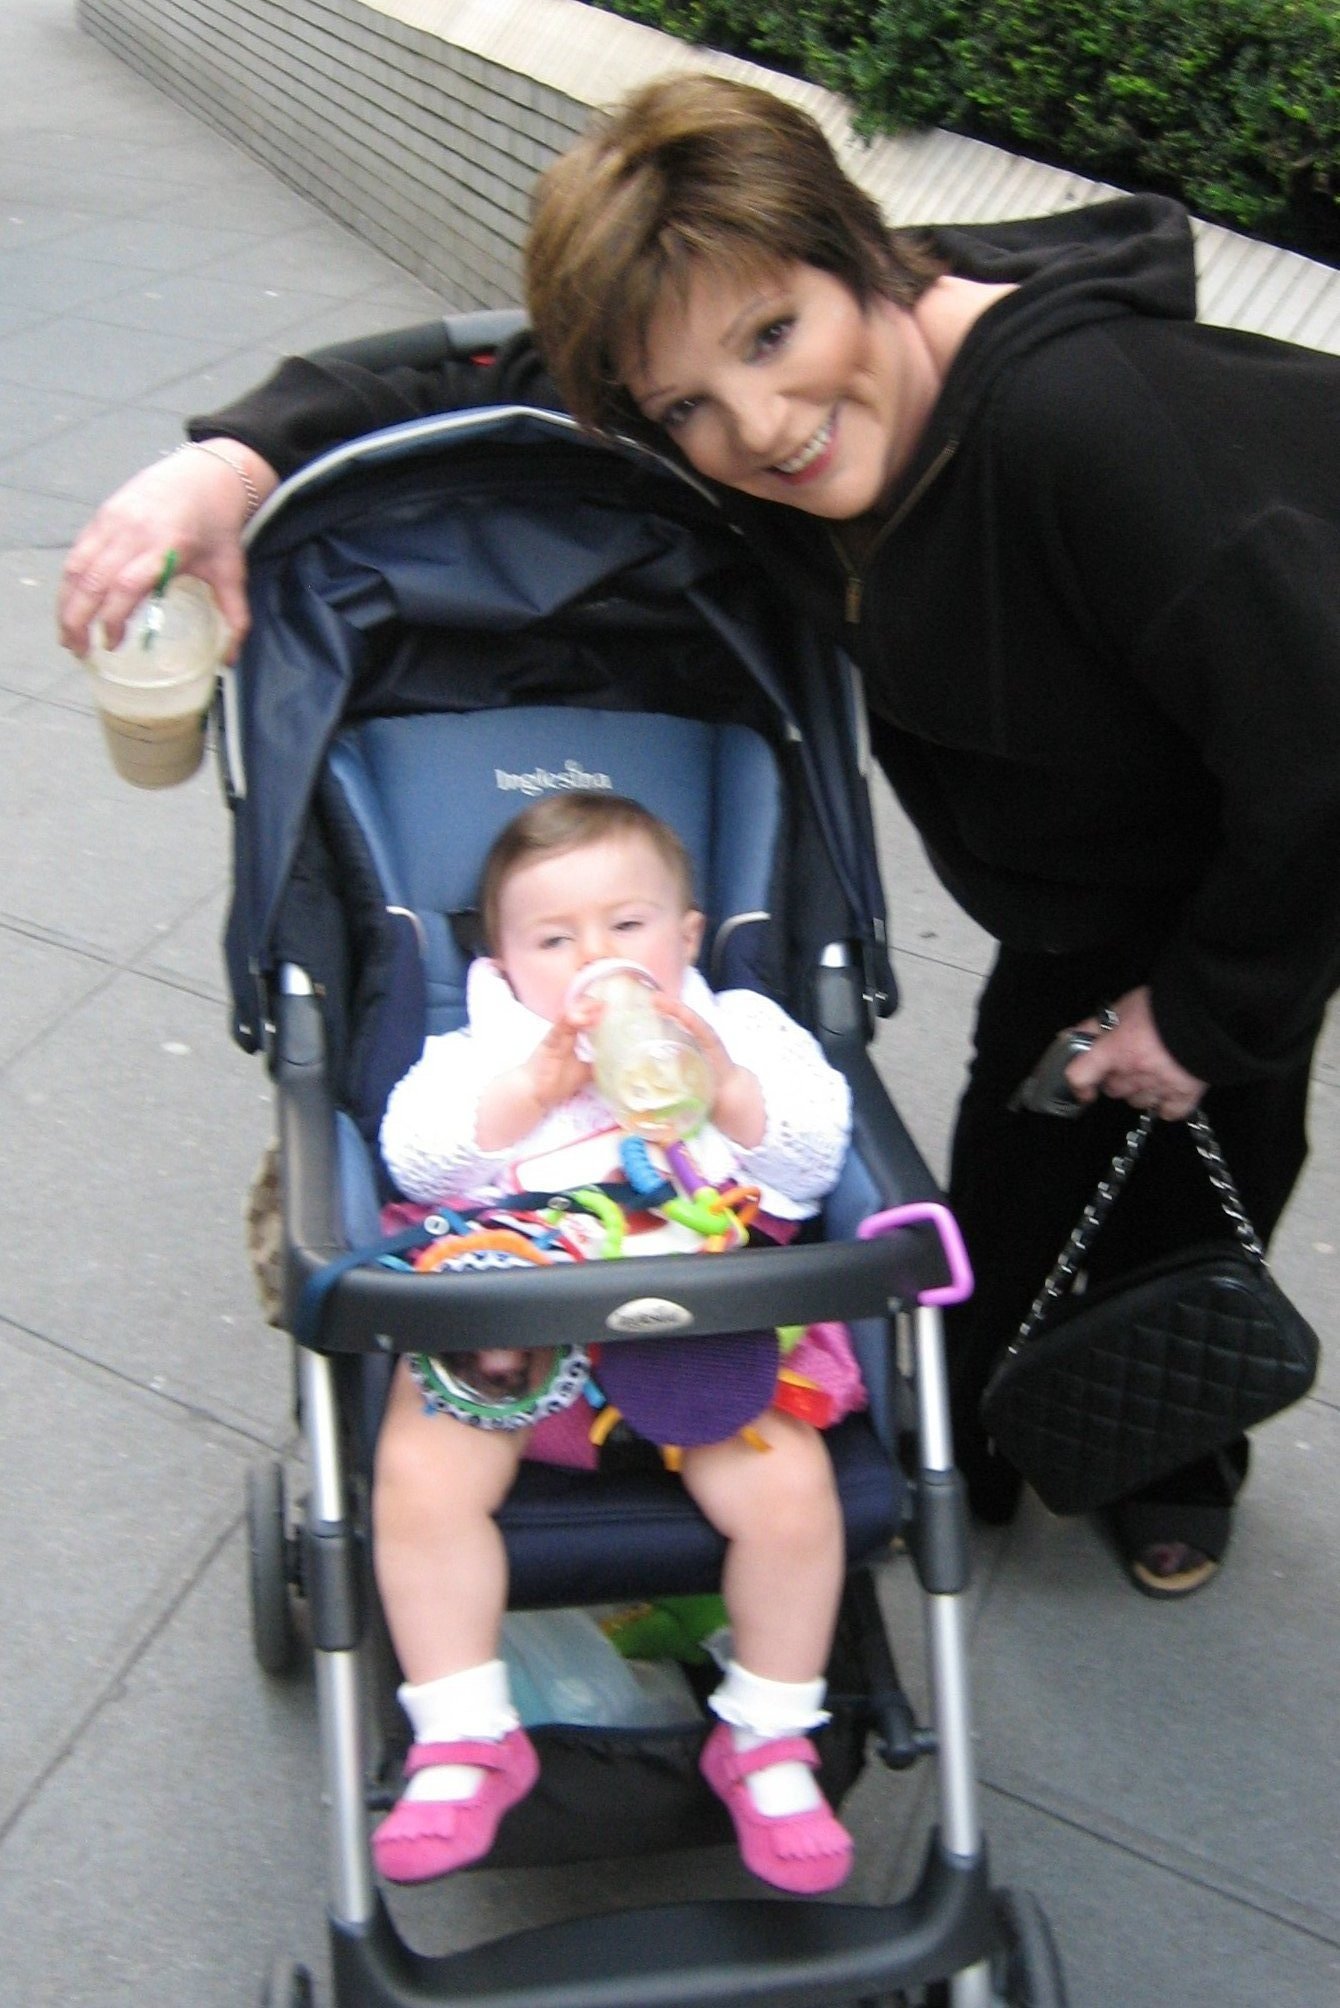 Hanging out with
Liza Minnelli in NYC